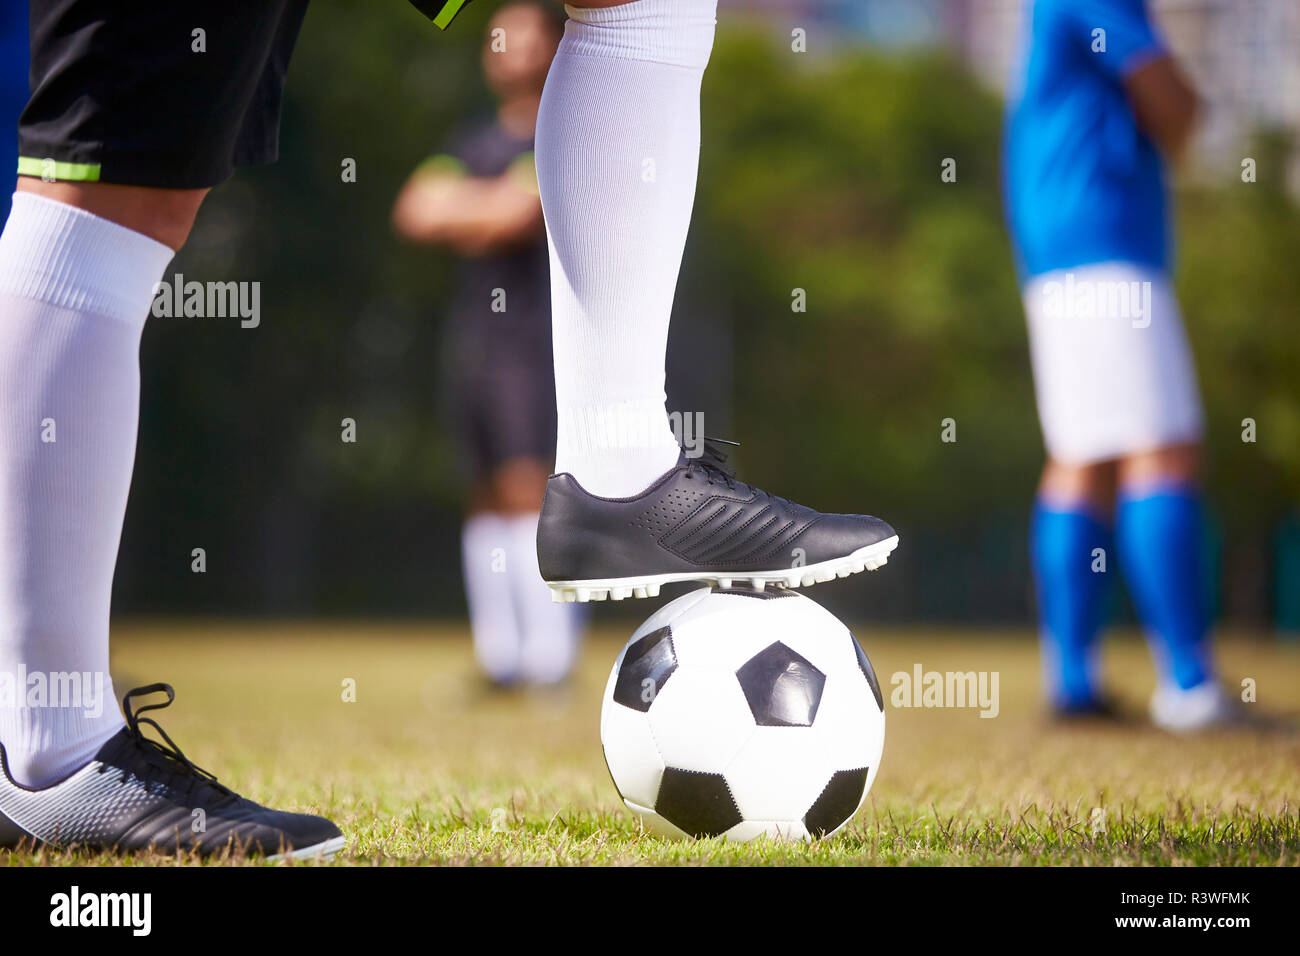 foot of a soccer player stepping on a football ready to kick off a match Stock Photo